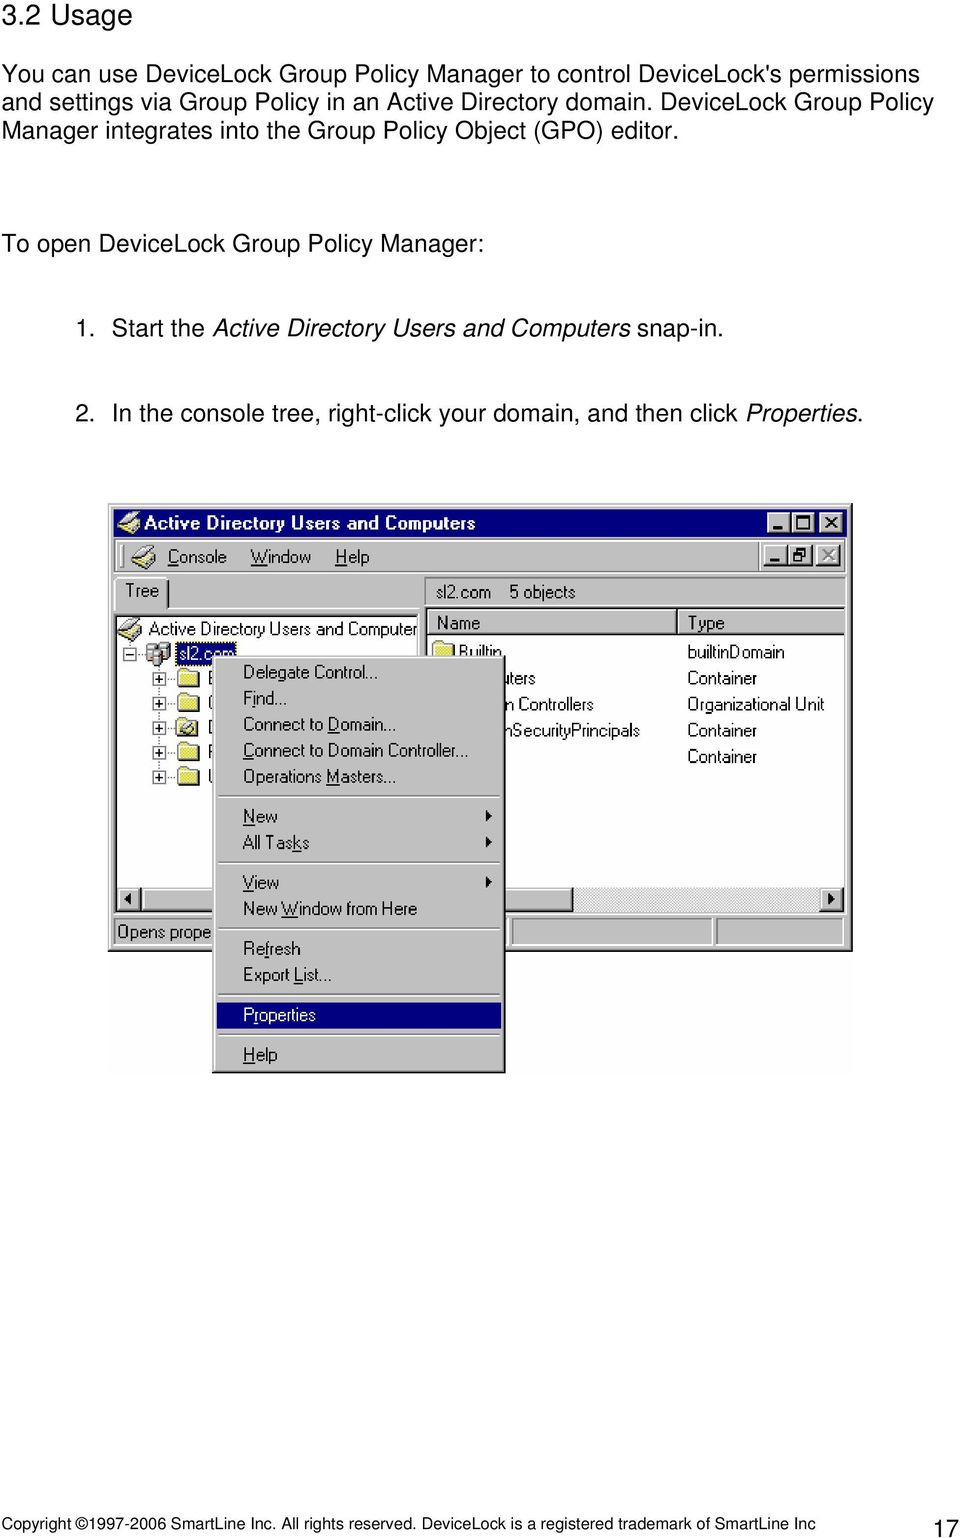 DeviceLock Group Policy Manager integrates into the Group Policy Object (GPO) editor.